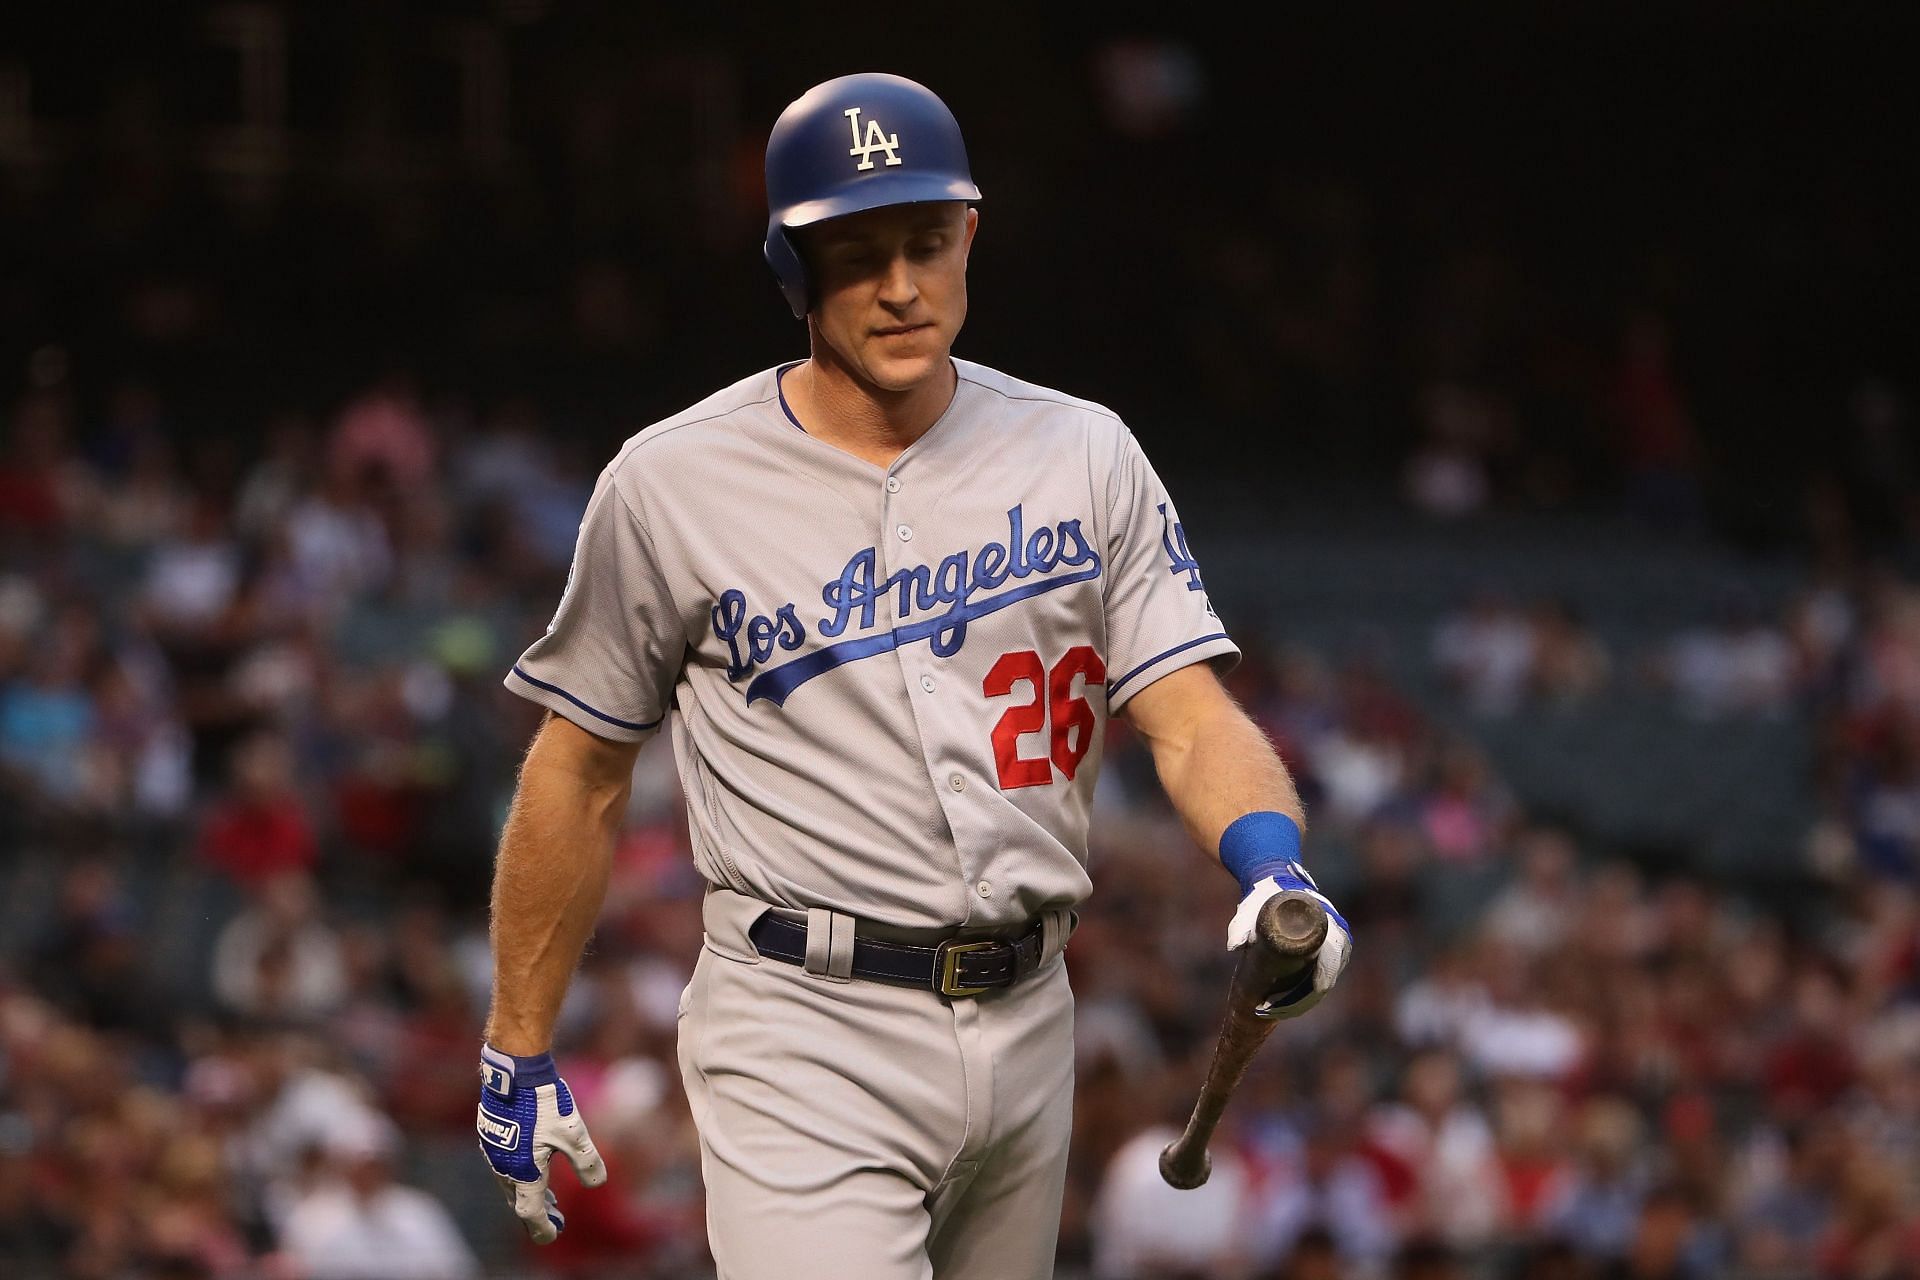 Chase Utley played for the Philadelphia Phillies and Los Angeles Dodgers